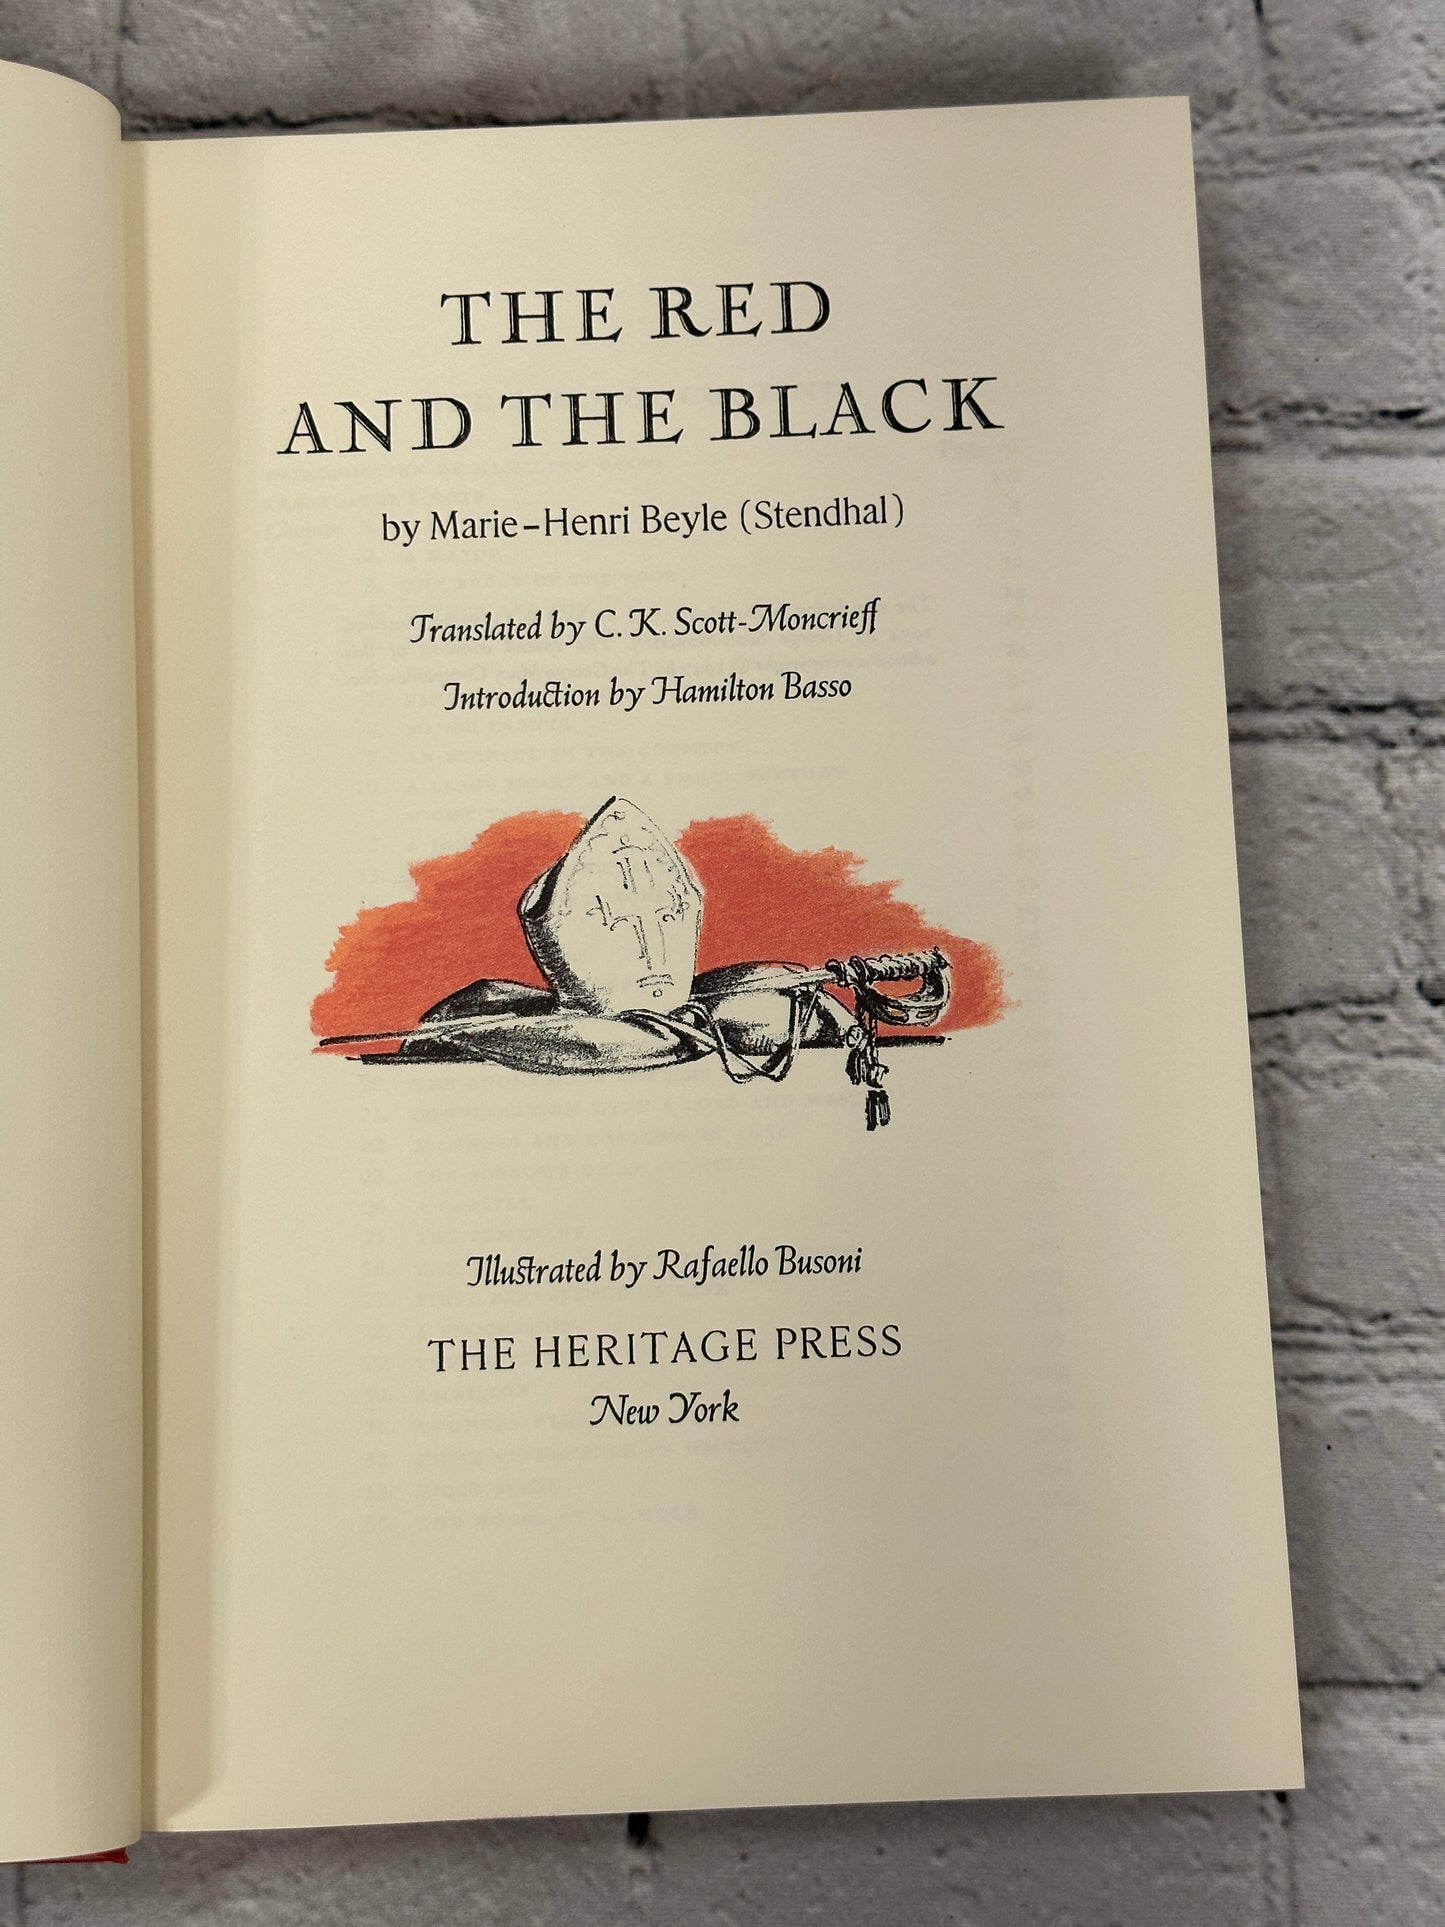 The Red and the Black by Marie-Henri Beyle Stendhal [1954]